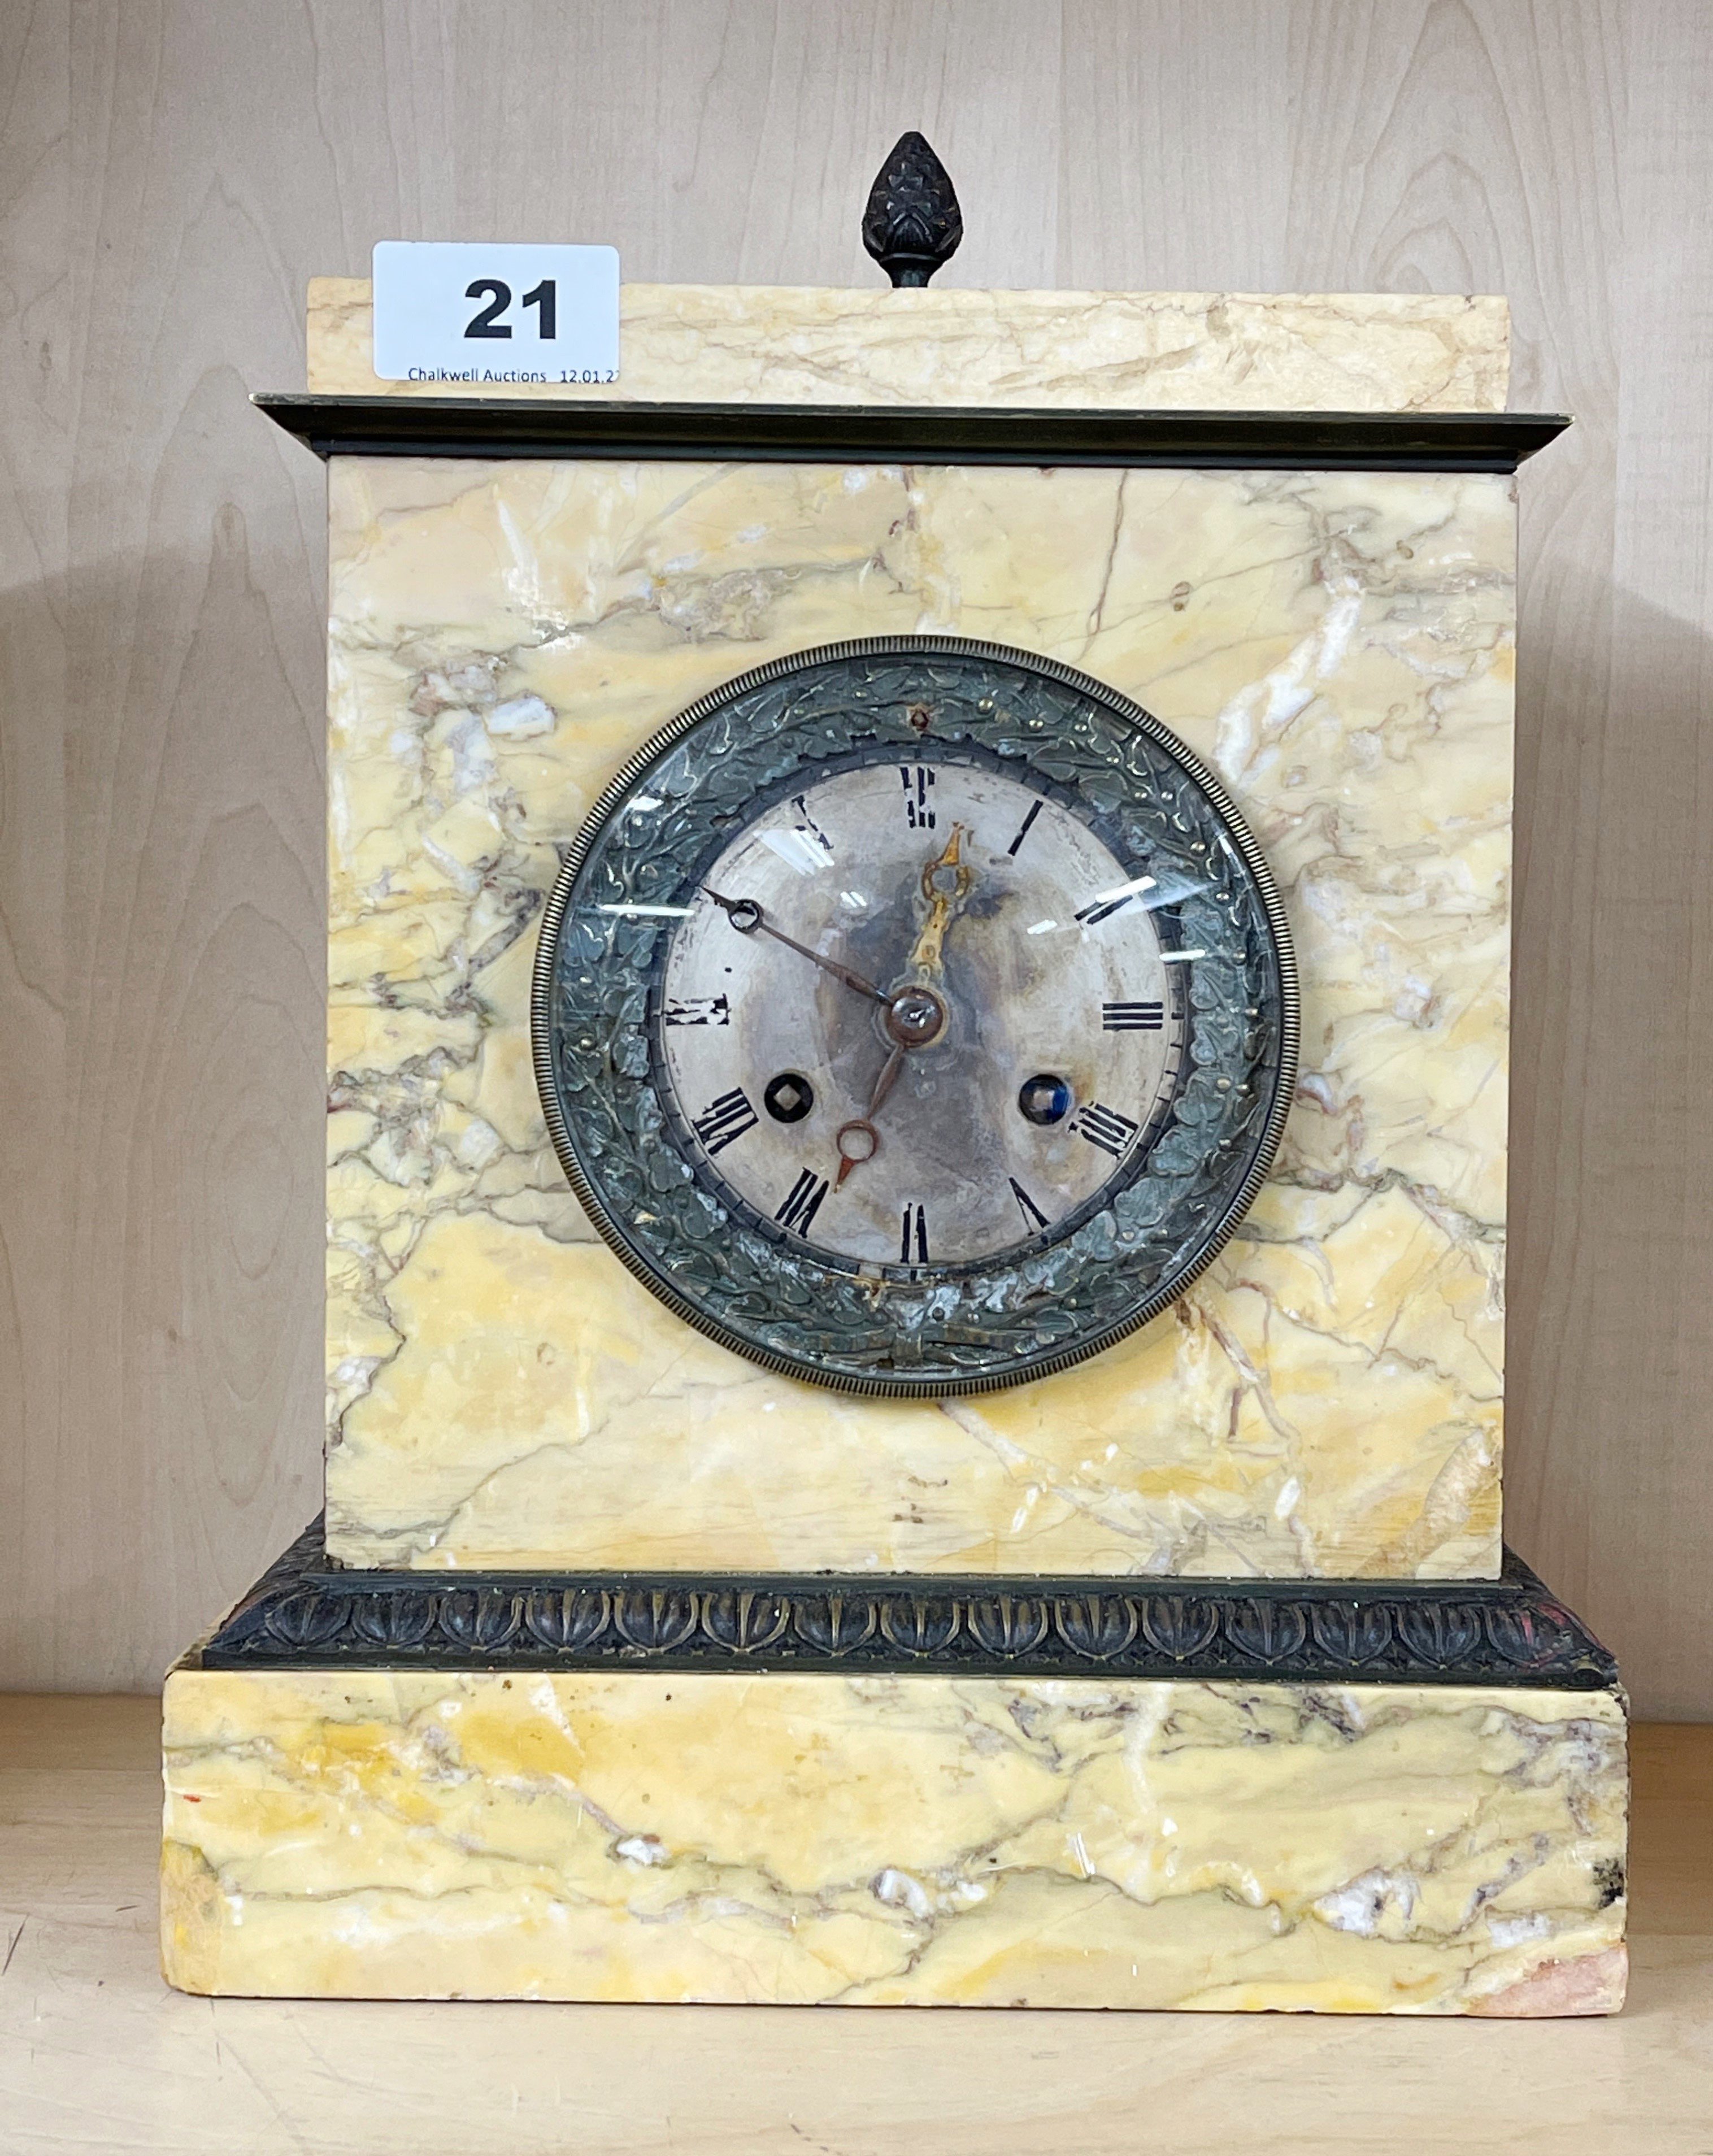 An early 19th century sienna marble and brass mantle clock with silk suspension, 31 x 22cm.